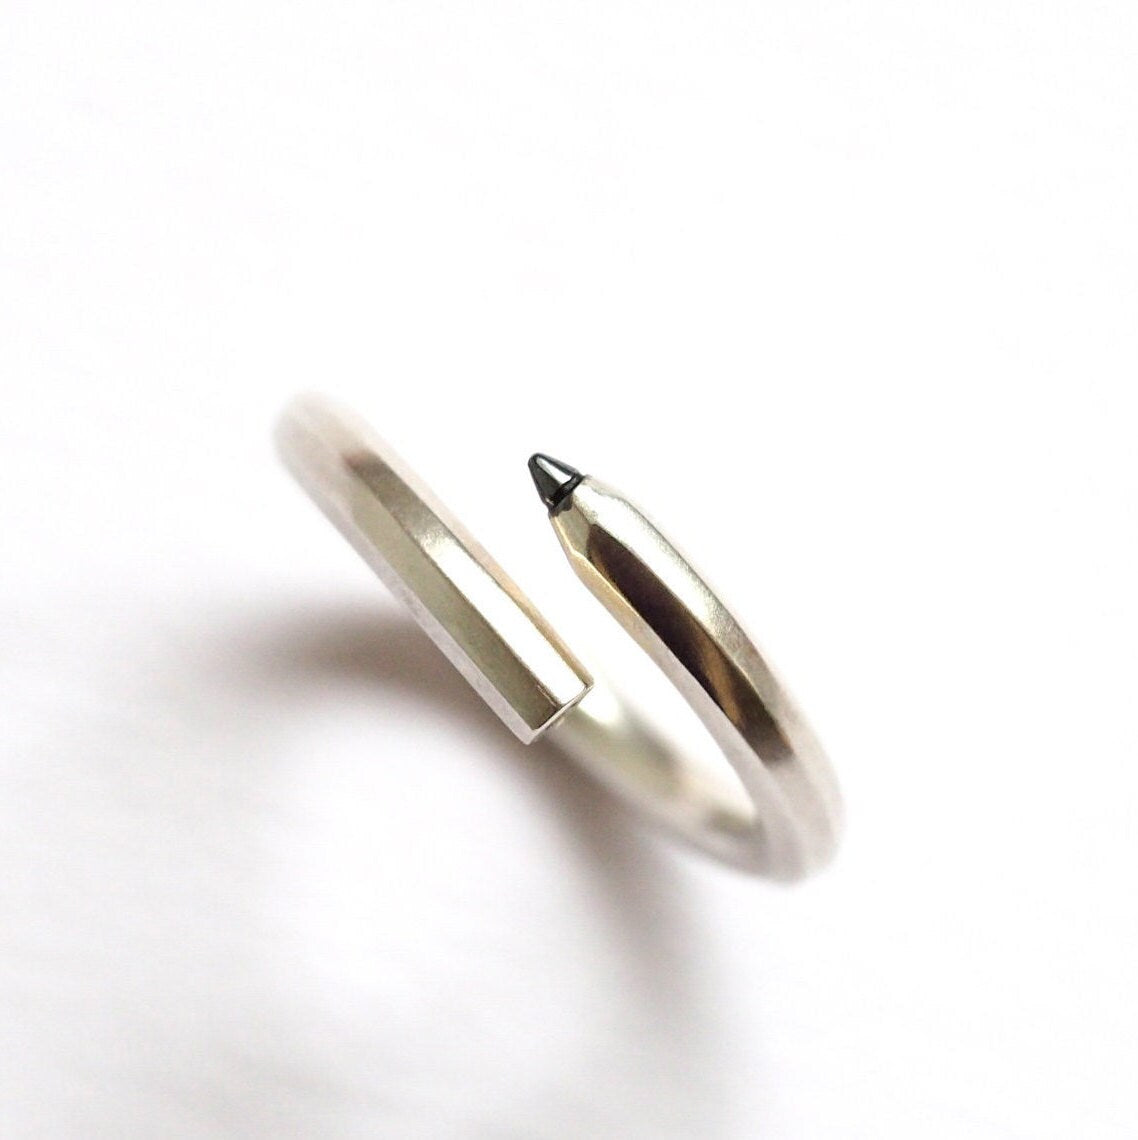 Pencil Ring - Sterling Silver and Black Diamond